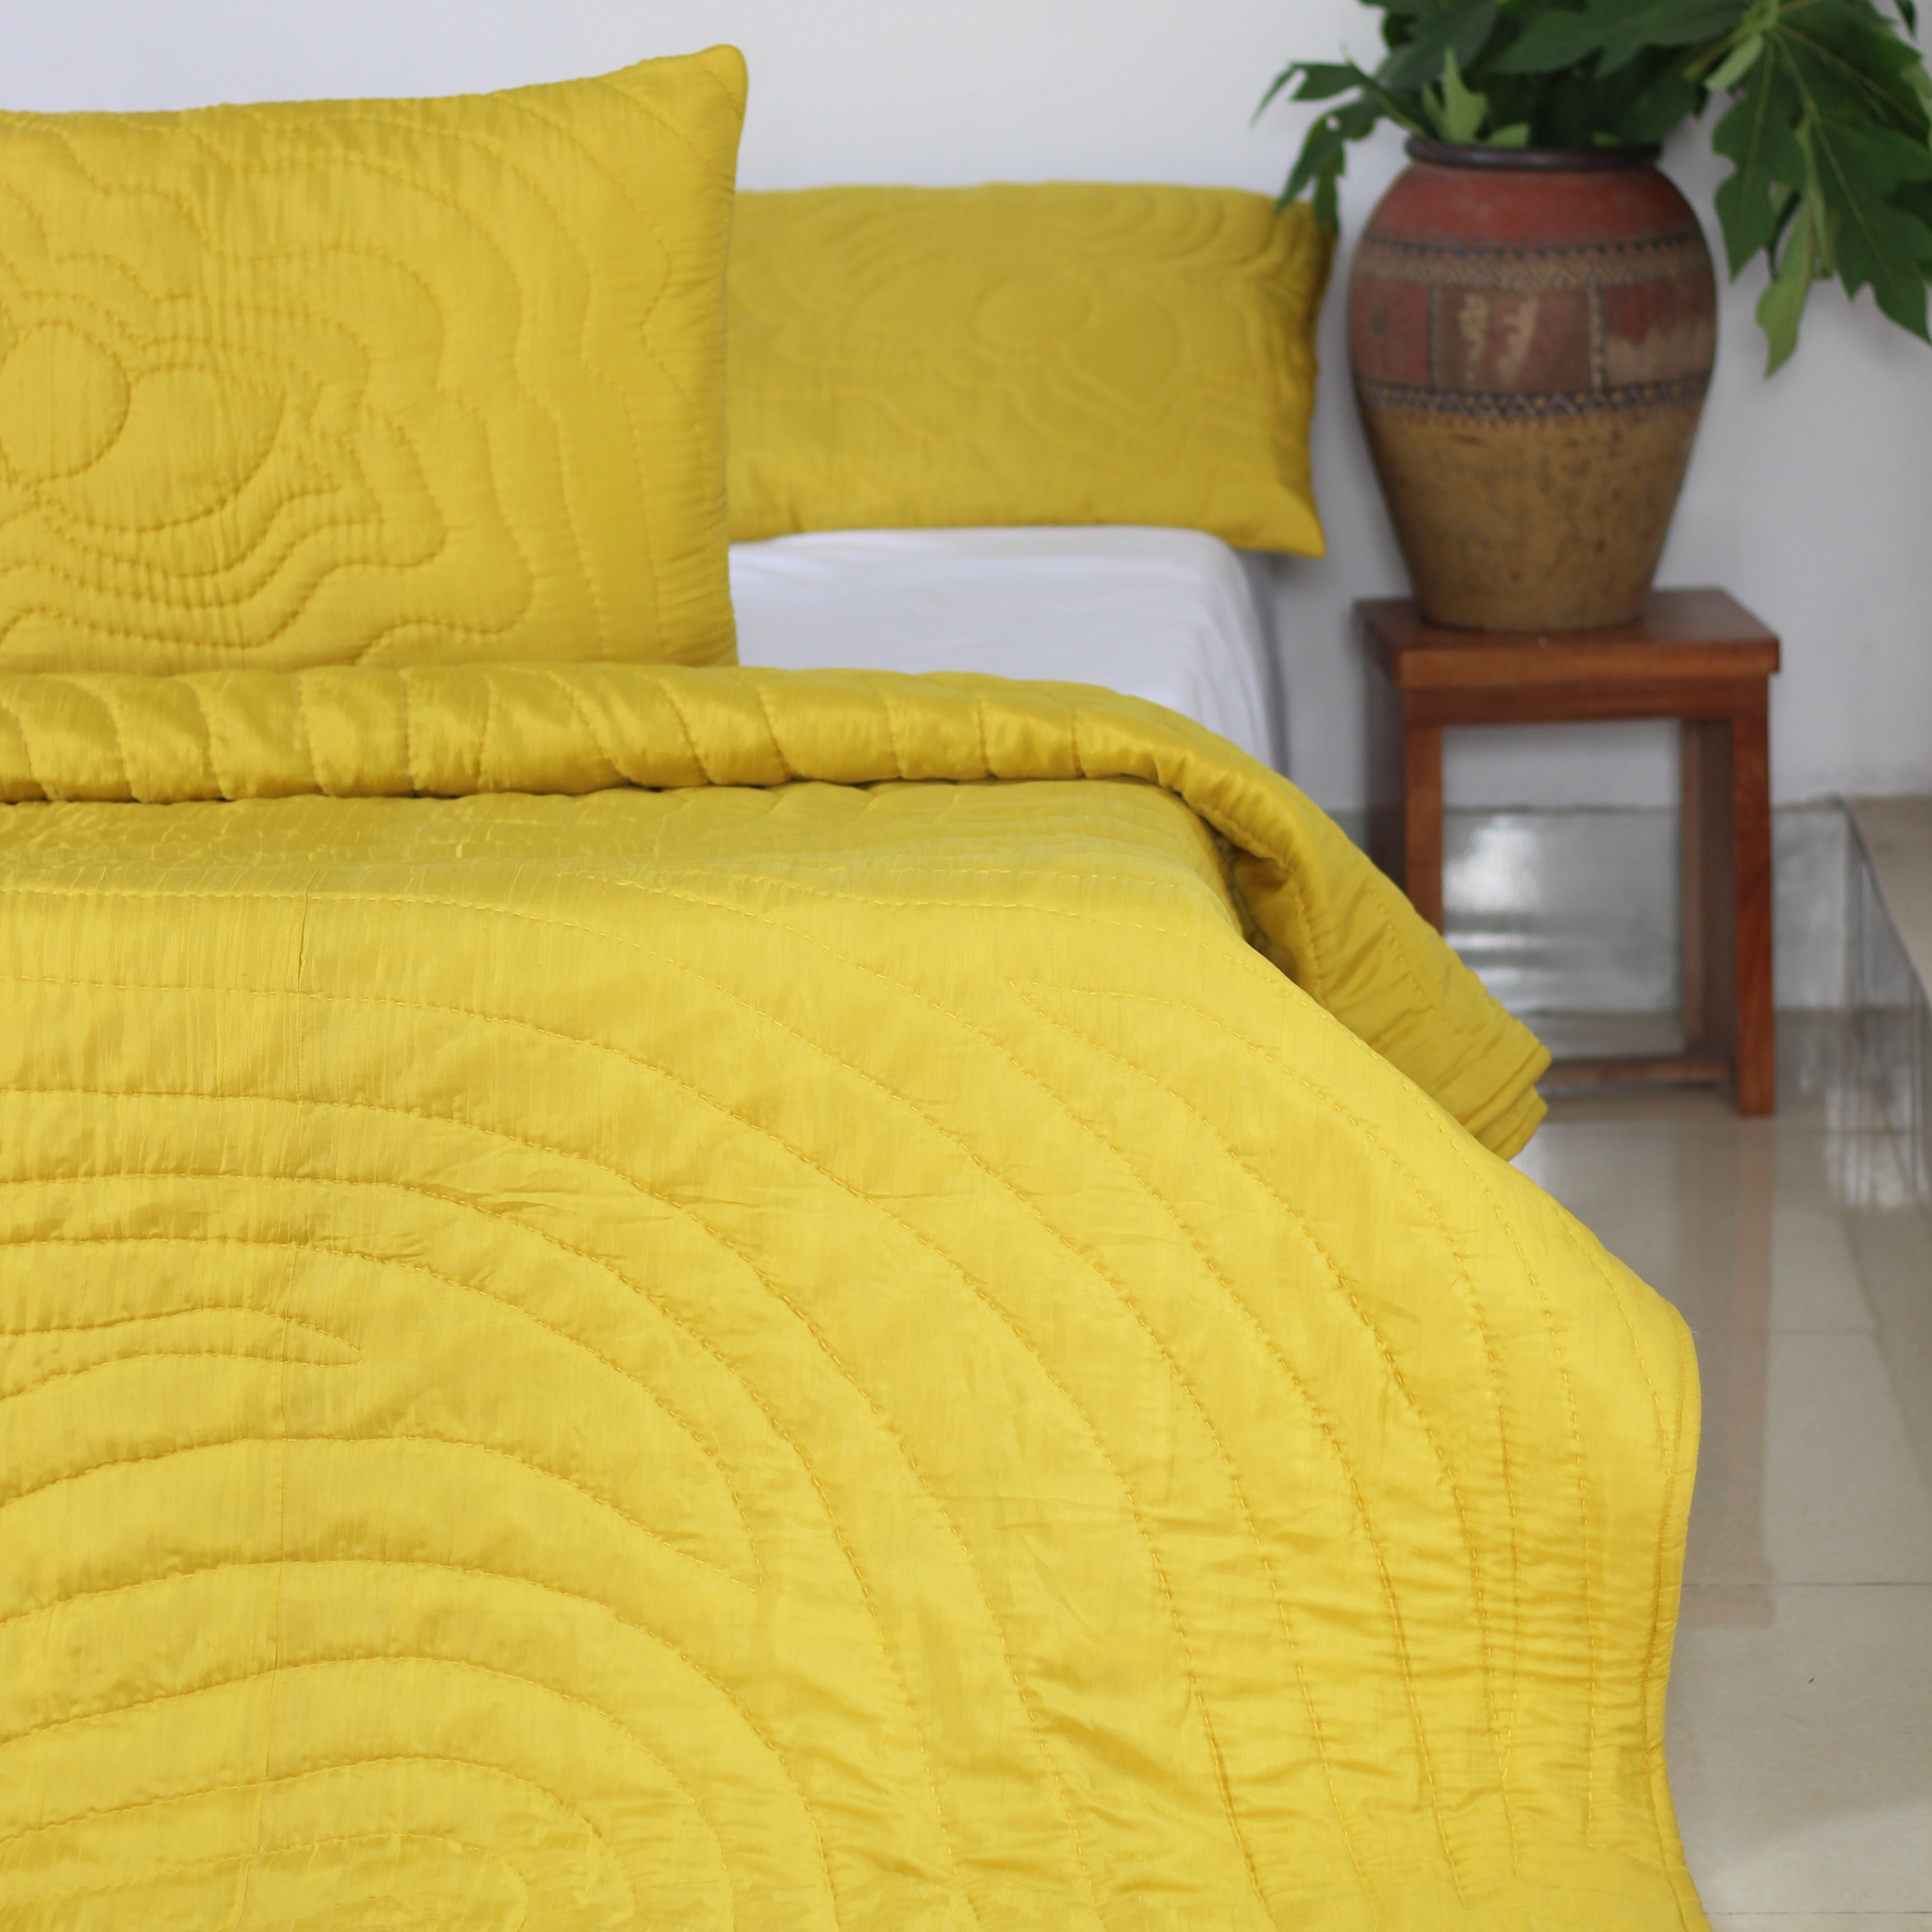 Mulberry Silk Hand Quilted Comforter Set-Lotus Leaf-Yellow & Gray